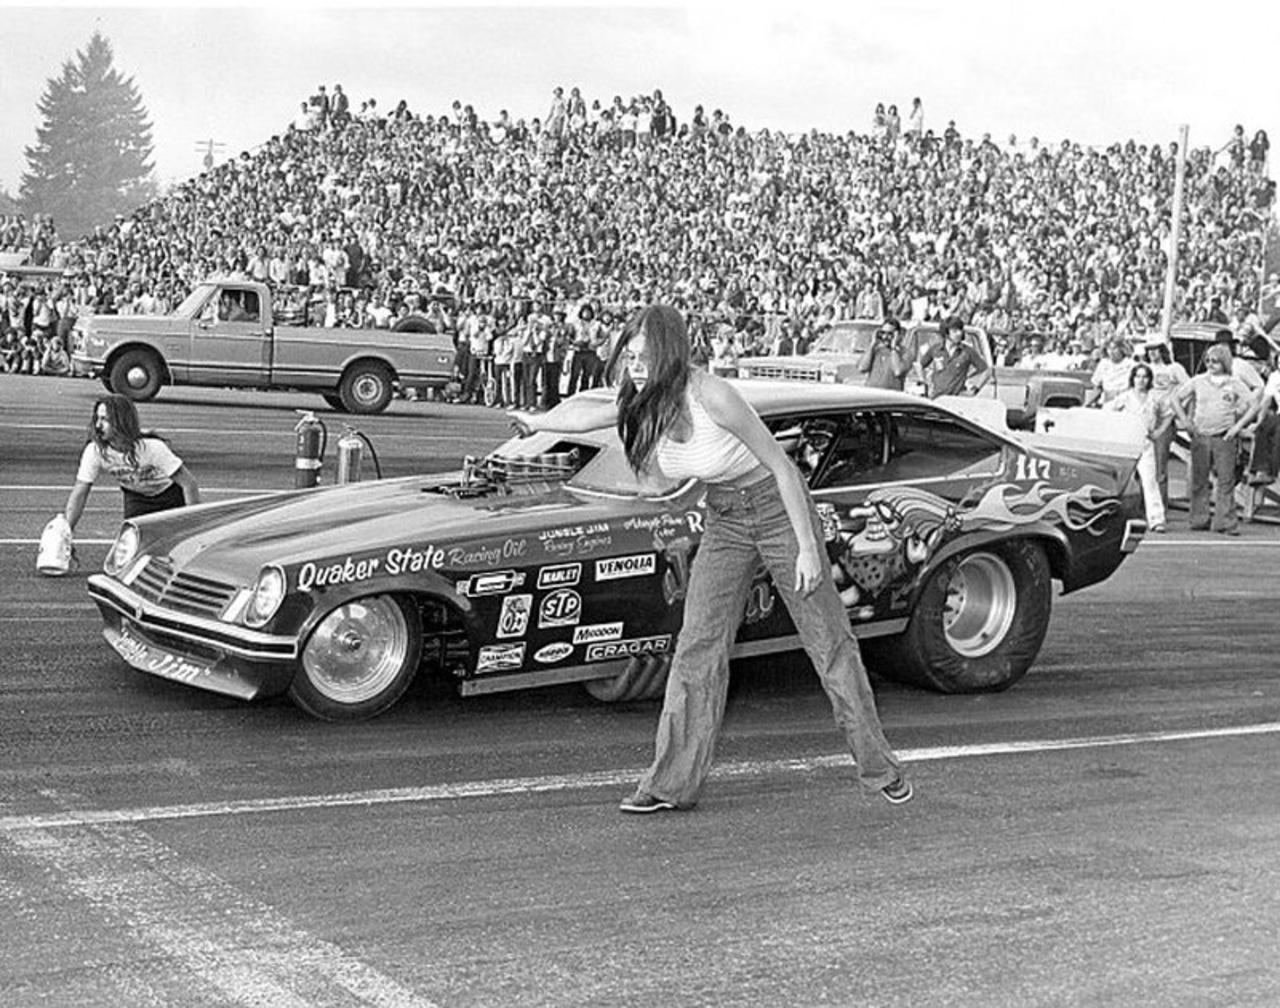 70s funny cars